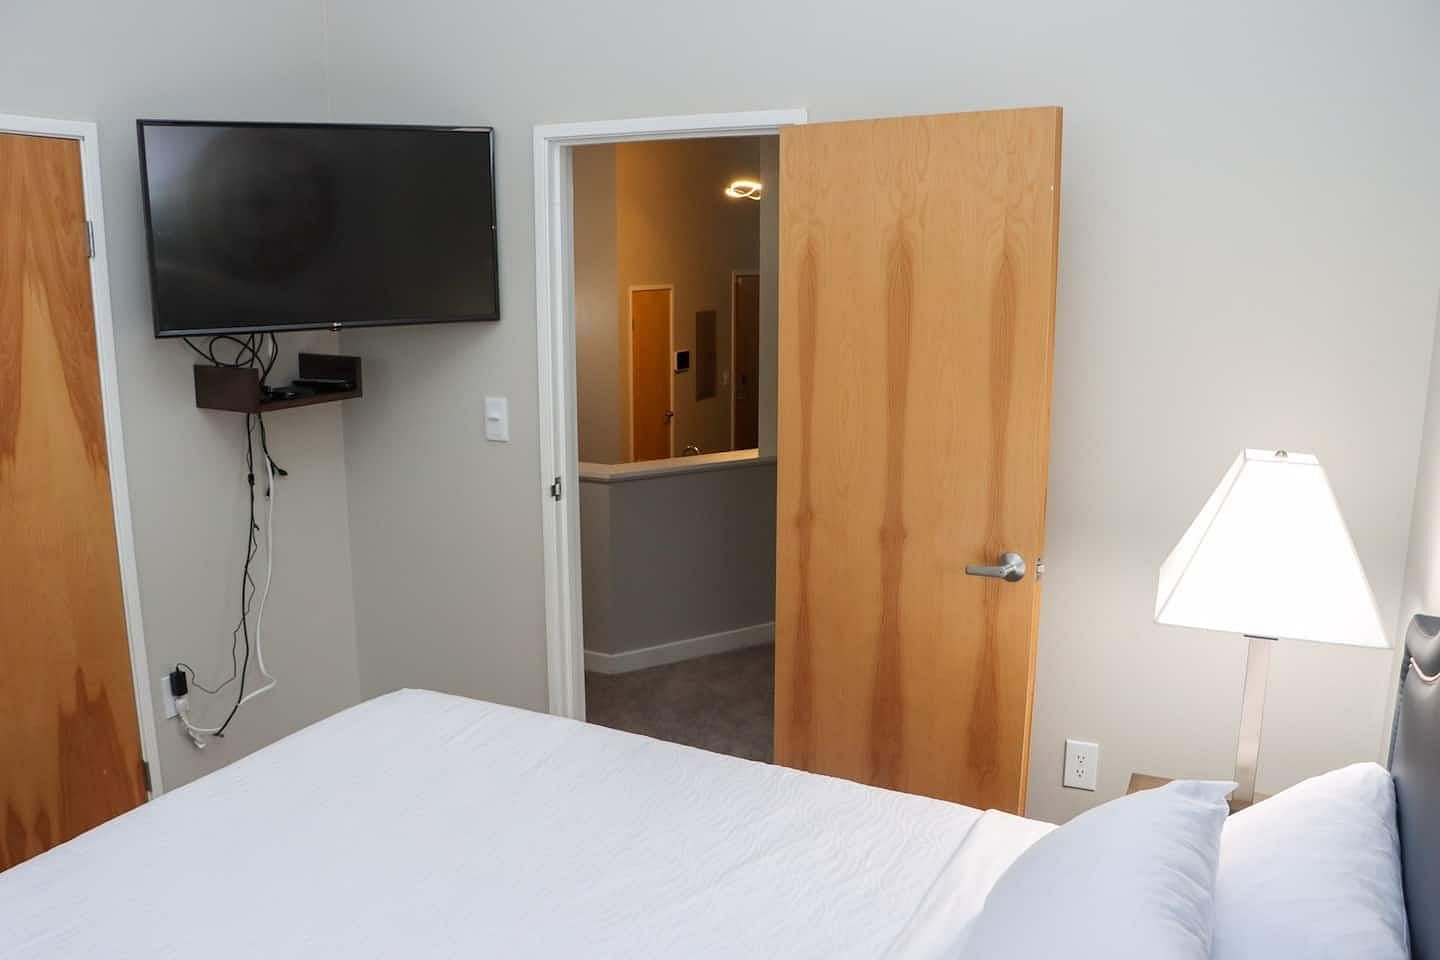 JWguest Rental unit at Indianapolis, Indiana | Executive Stay in Indianapolis | Jwbnb no brobnb 21